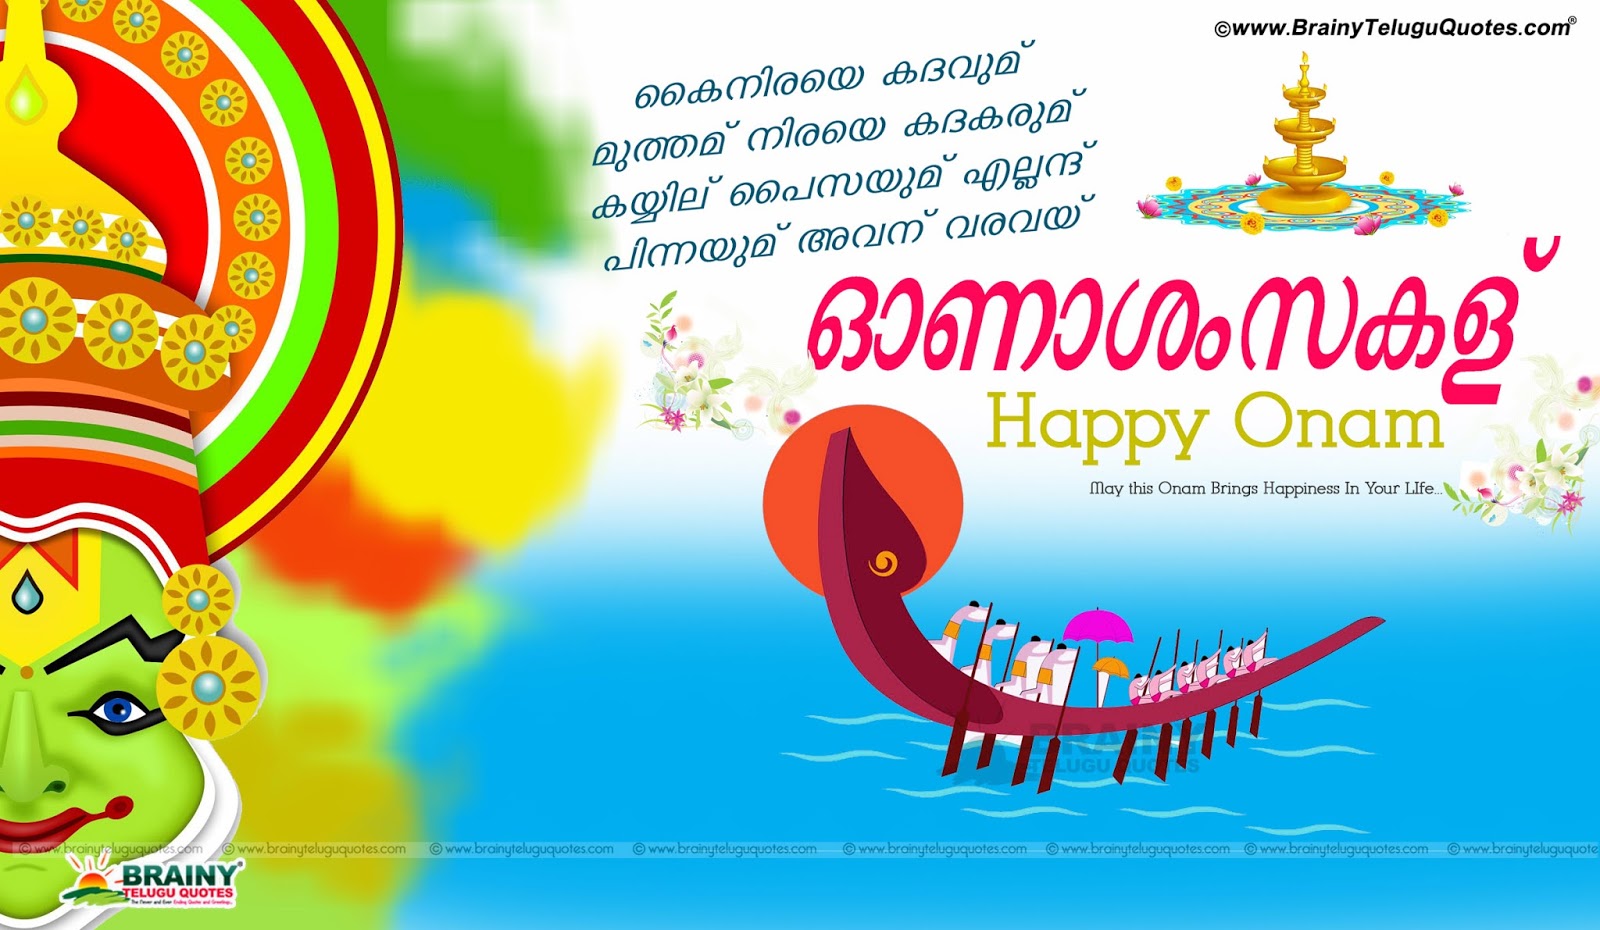 welcome speech quotes in malayalam